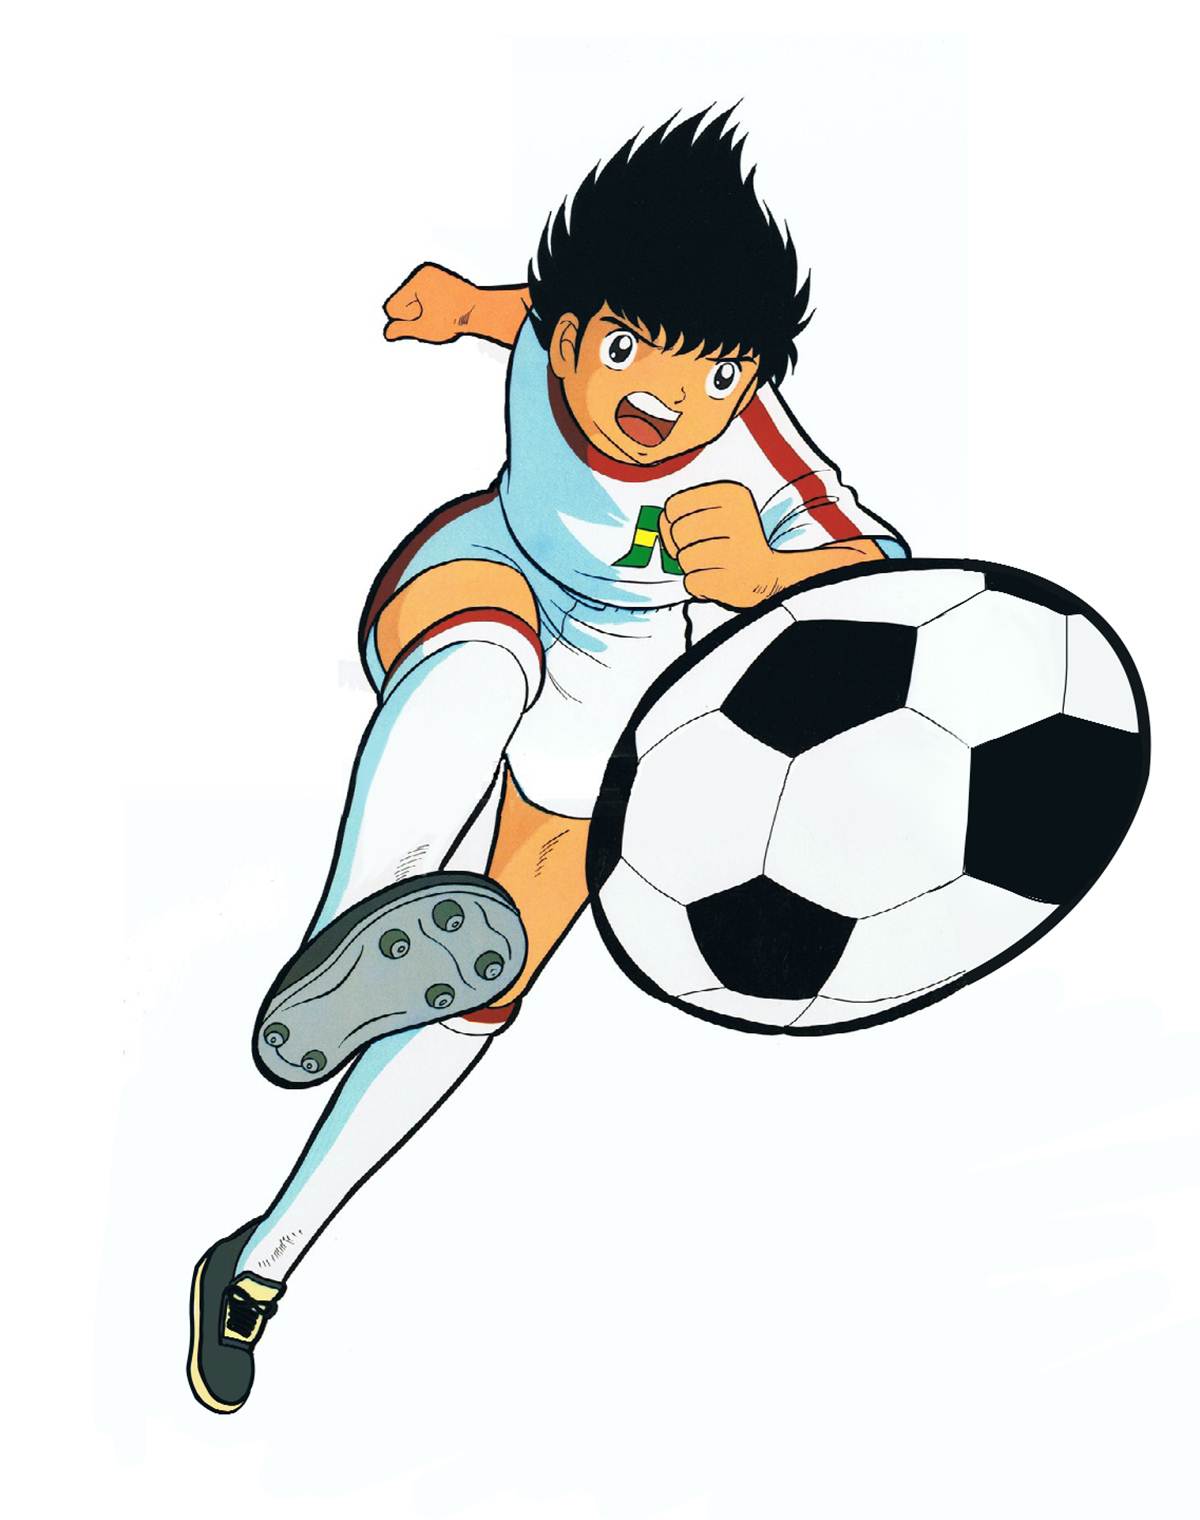 The Anime That Inspired a Generation of Latin American Soccer Greats